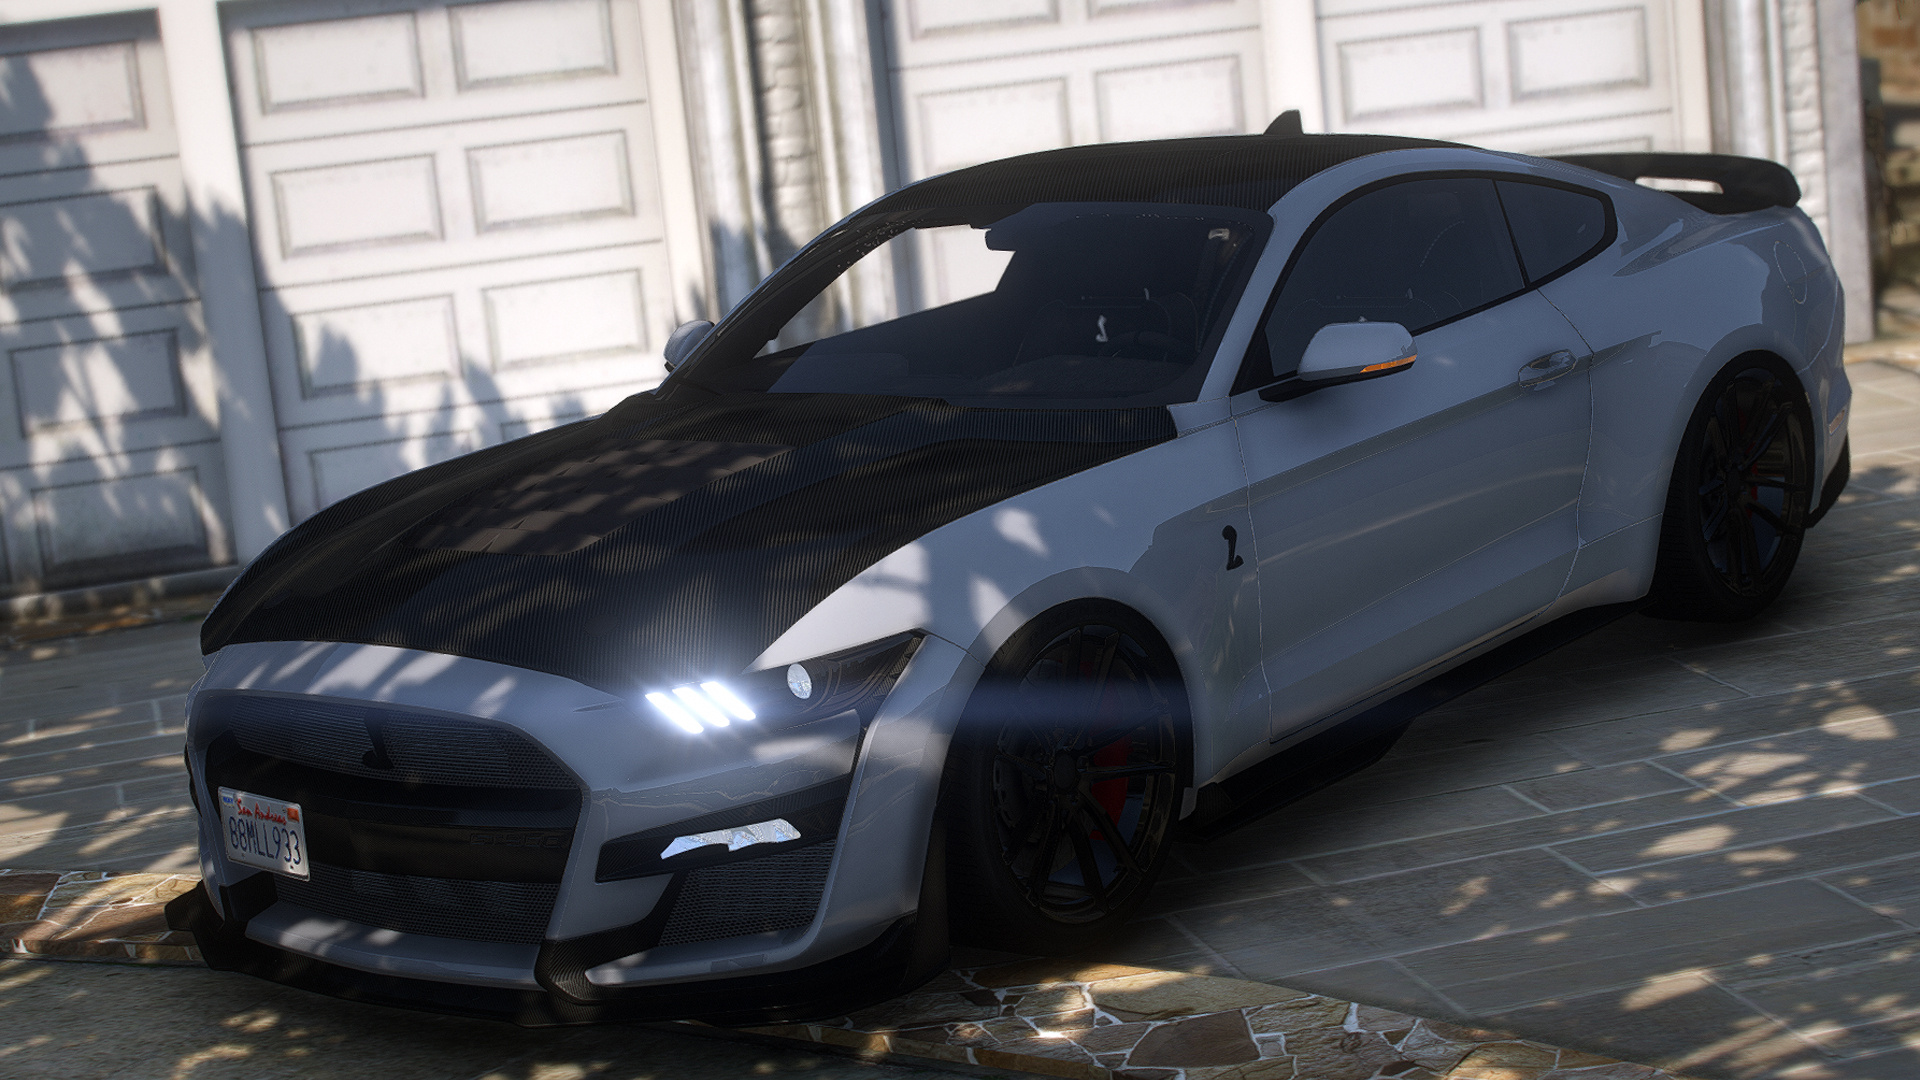 https://img.gta5-mods.com/q95/images/ford-mustang-shelby-gt500-carbon-aero-package-add-on-extras-fivem/a11de7-screenshot-1.jpg